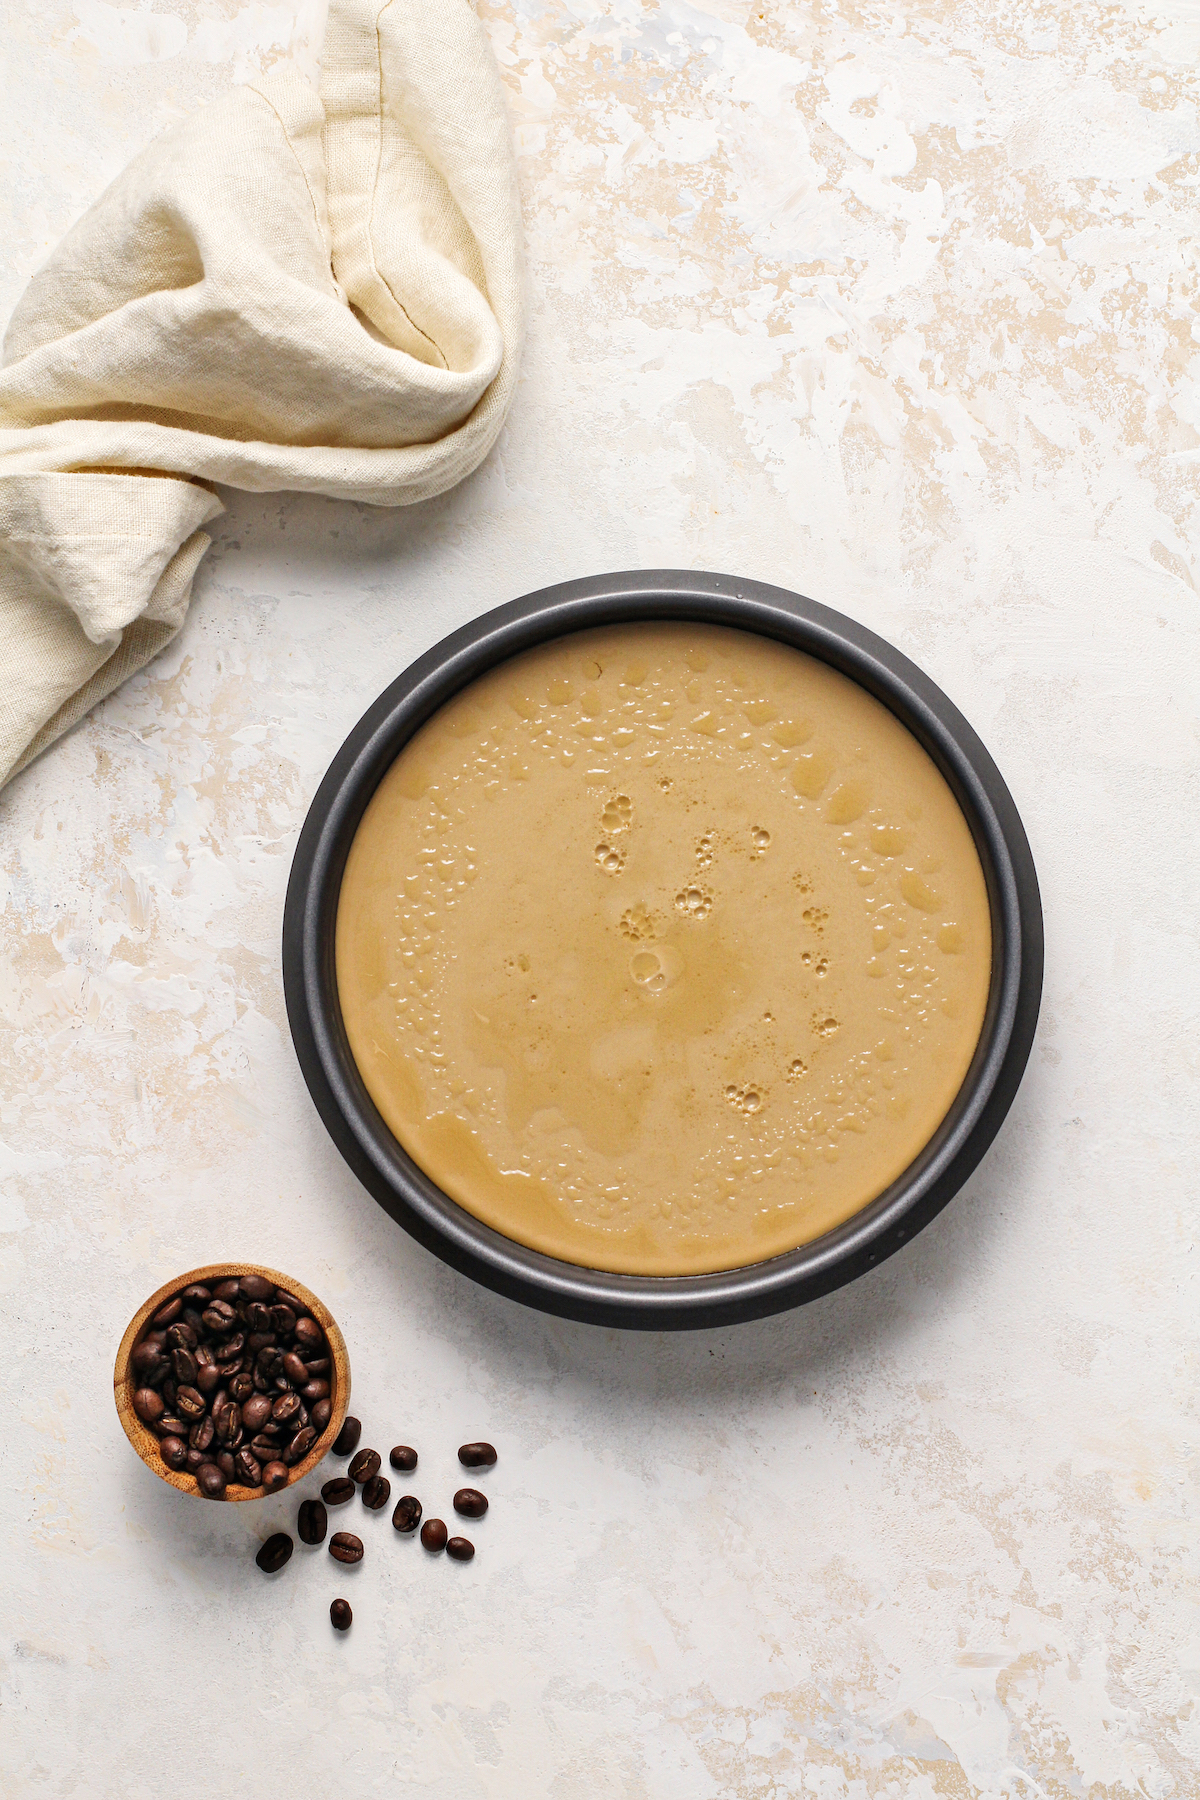 Freshly baked flan that has been chilled still in a baking pan with espresso beans in a bowl.